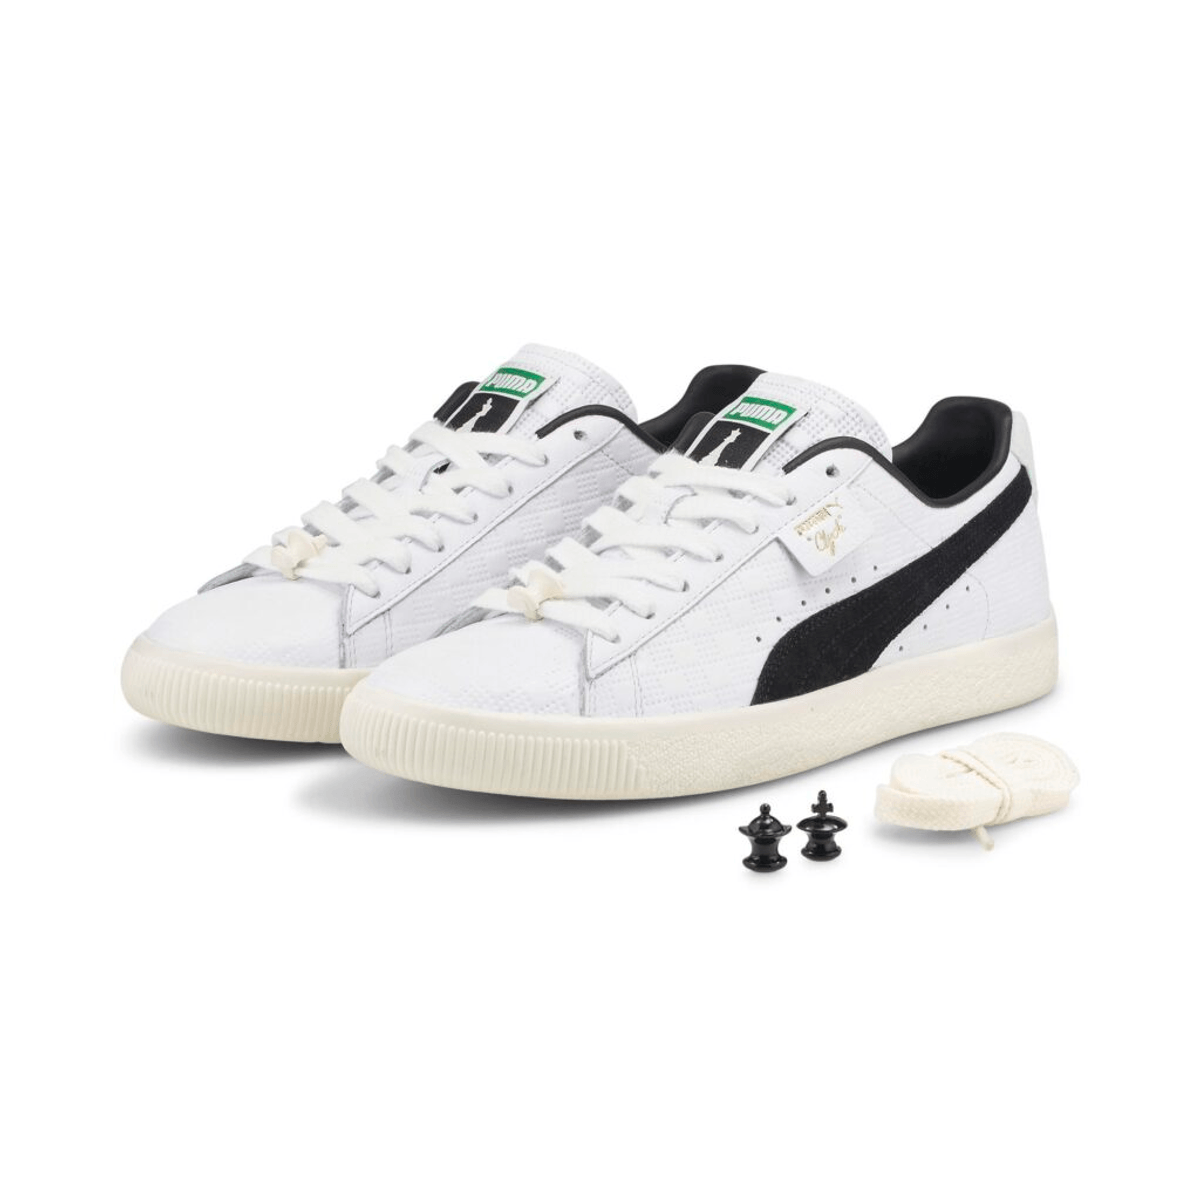 Look Stylish While Playing Chess with the New Magnus Carlsen x PUMA Clyde 'Chess'